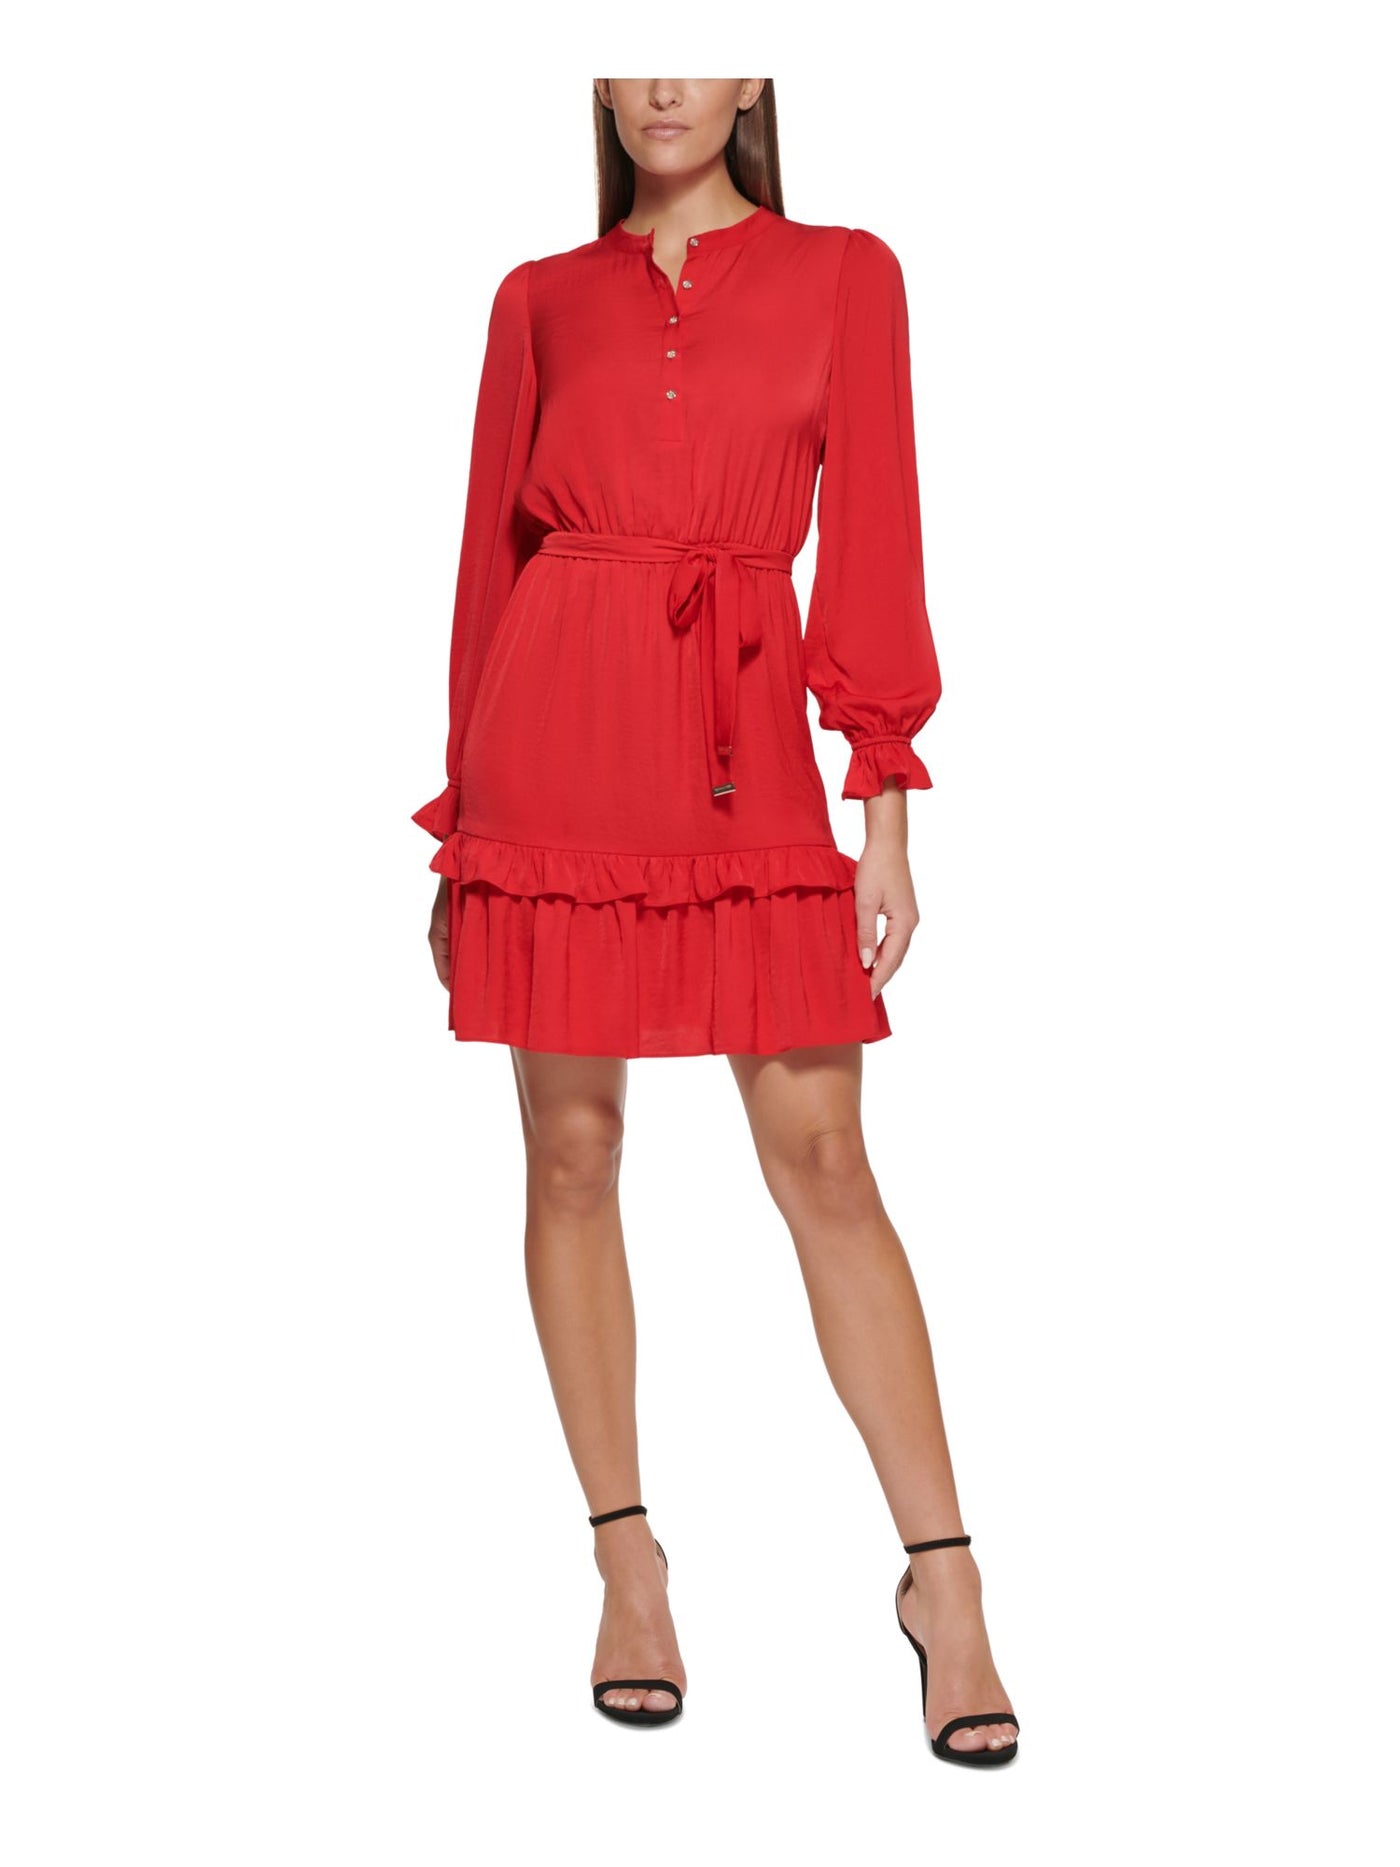 TOMMY HILFIGER Womens Red Ruffled Pull-on Style Blouson Sleeve Round Neck Above The Knee Party Shift Dress Petites 6P